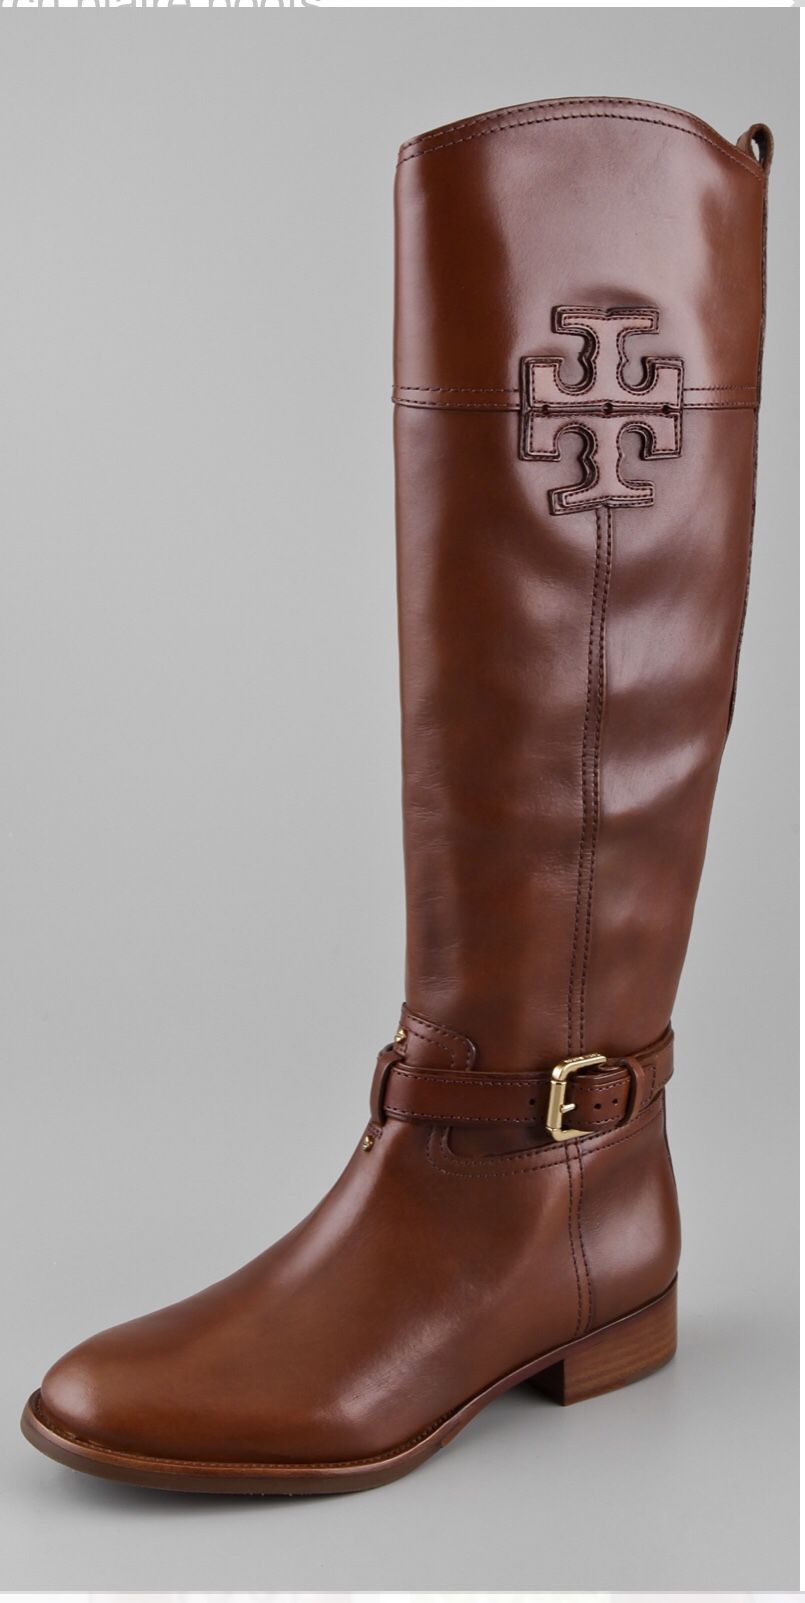 New Tory Burch Blaire Boots 6 for Sale in Euless, TX - OfferUp